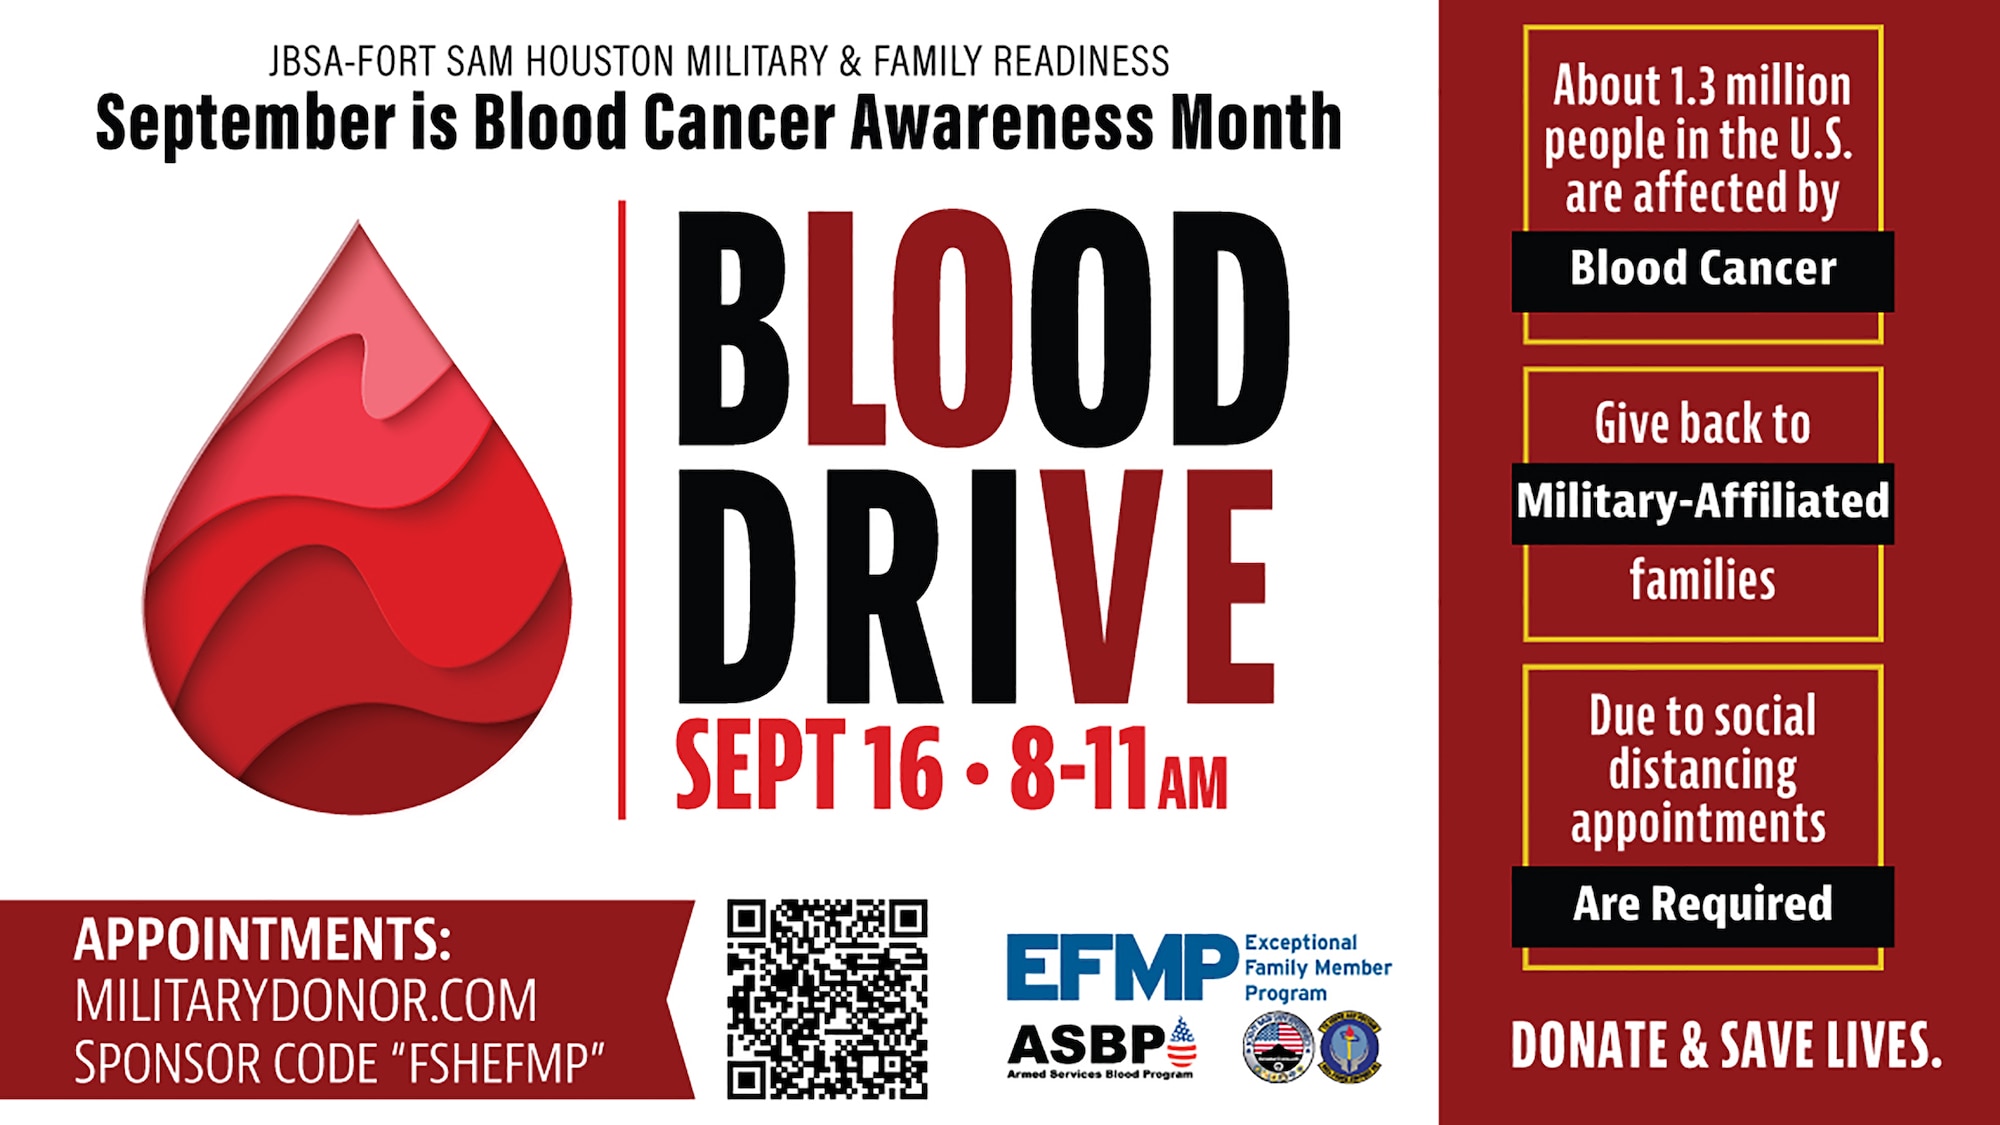 Blood donors are needed as the Joint Base San Antonio Exceptional Family Member Program is hosting a blood drive from 8-11 a.m. Sept. 16 at the JBSA-Fort Sam Houston Military & Family Readiness Center, 3060 Stanley Road, building 2797.